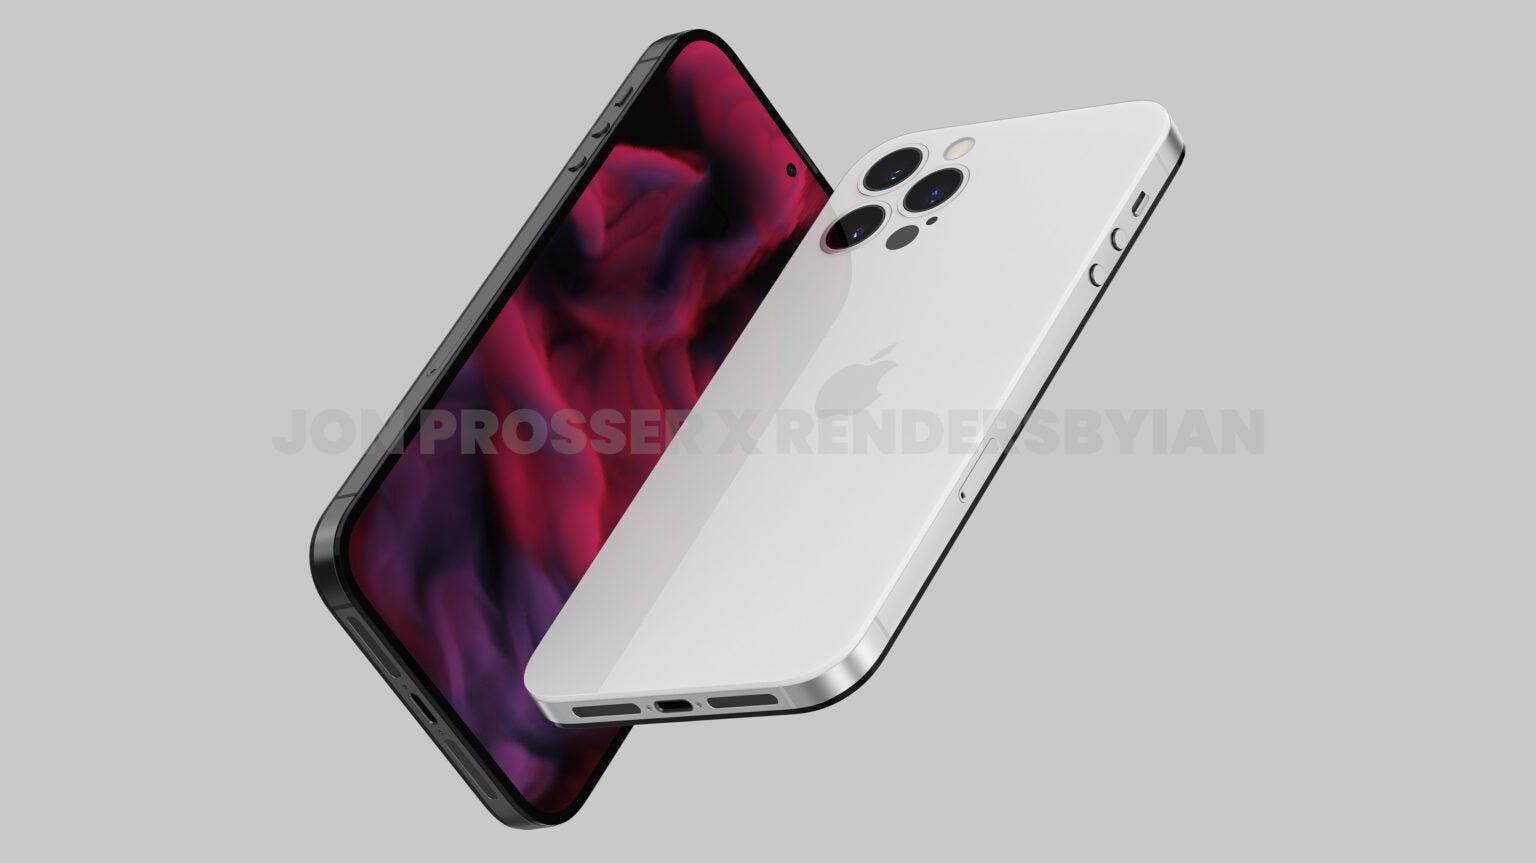 Is this going to be the most expensive iPhone lineup ever? iPhone 14 Pro Max design, according to Jon Prosser. - Are Samsung, OnePlus, and Xiaomi trying to escape Apple&#039;s shadow?